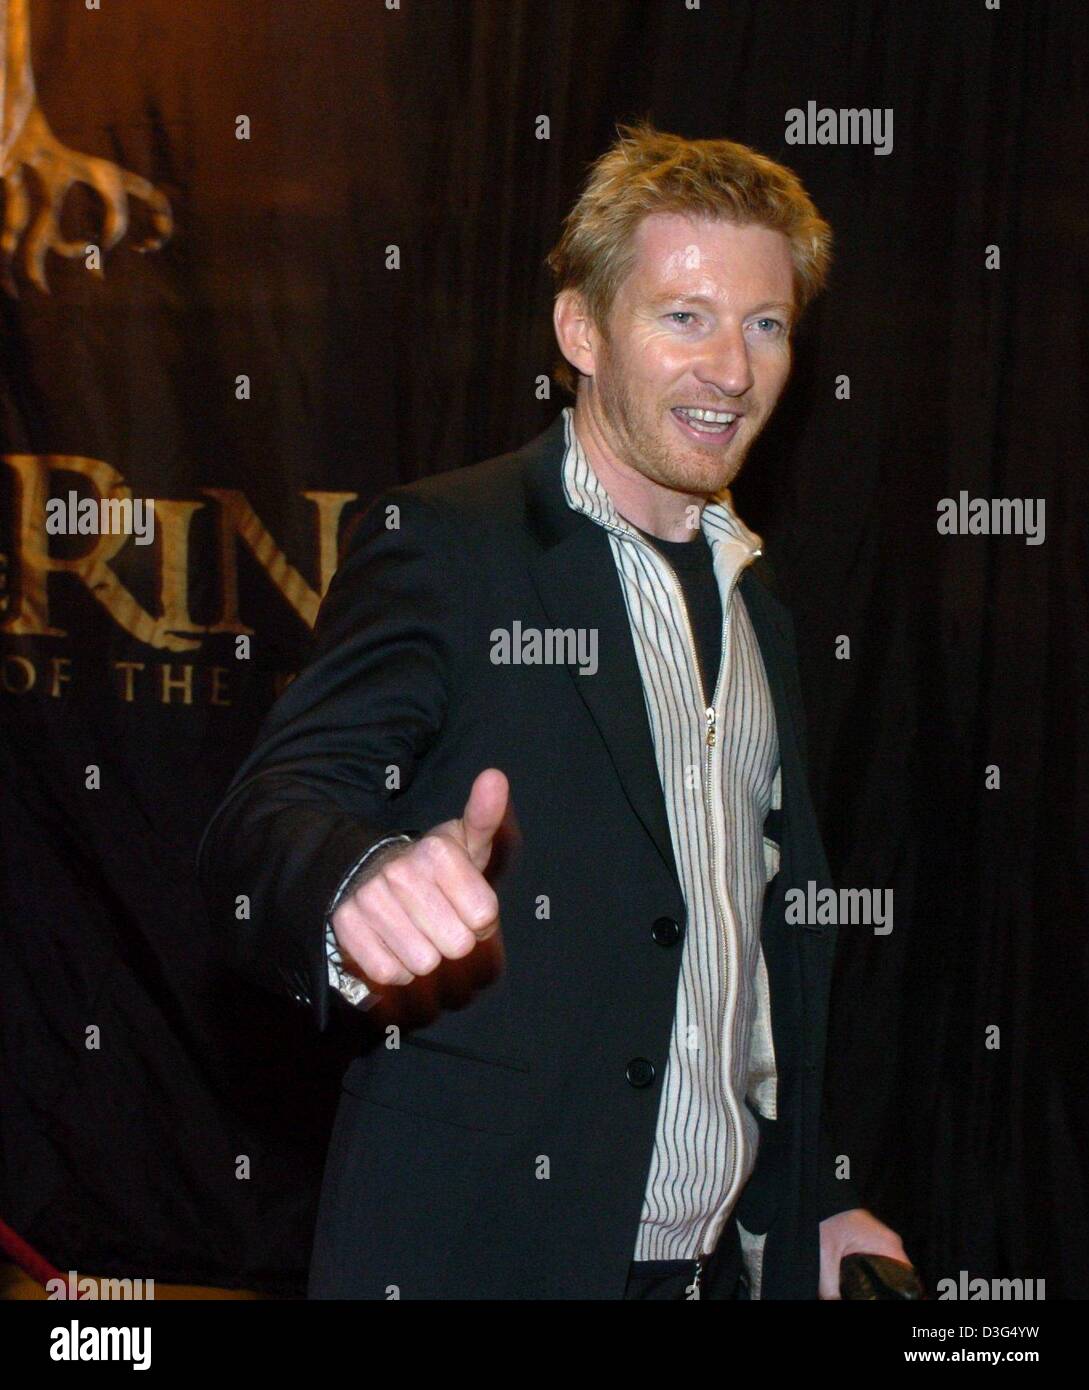 (dpa) - Actor David Wenham, who plays the part of Faramir, arrives at the European premiere of the film 'Lord of the Rings - The Return of the King' in Berlin, 10 December 2003. Stock Photo